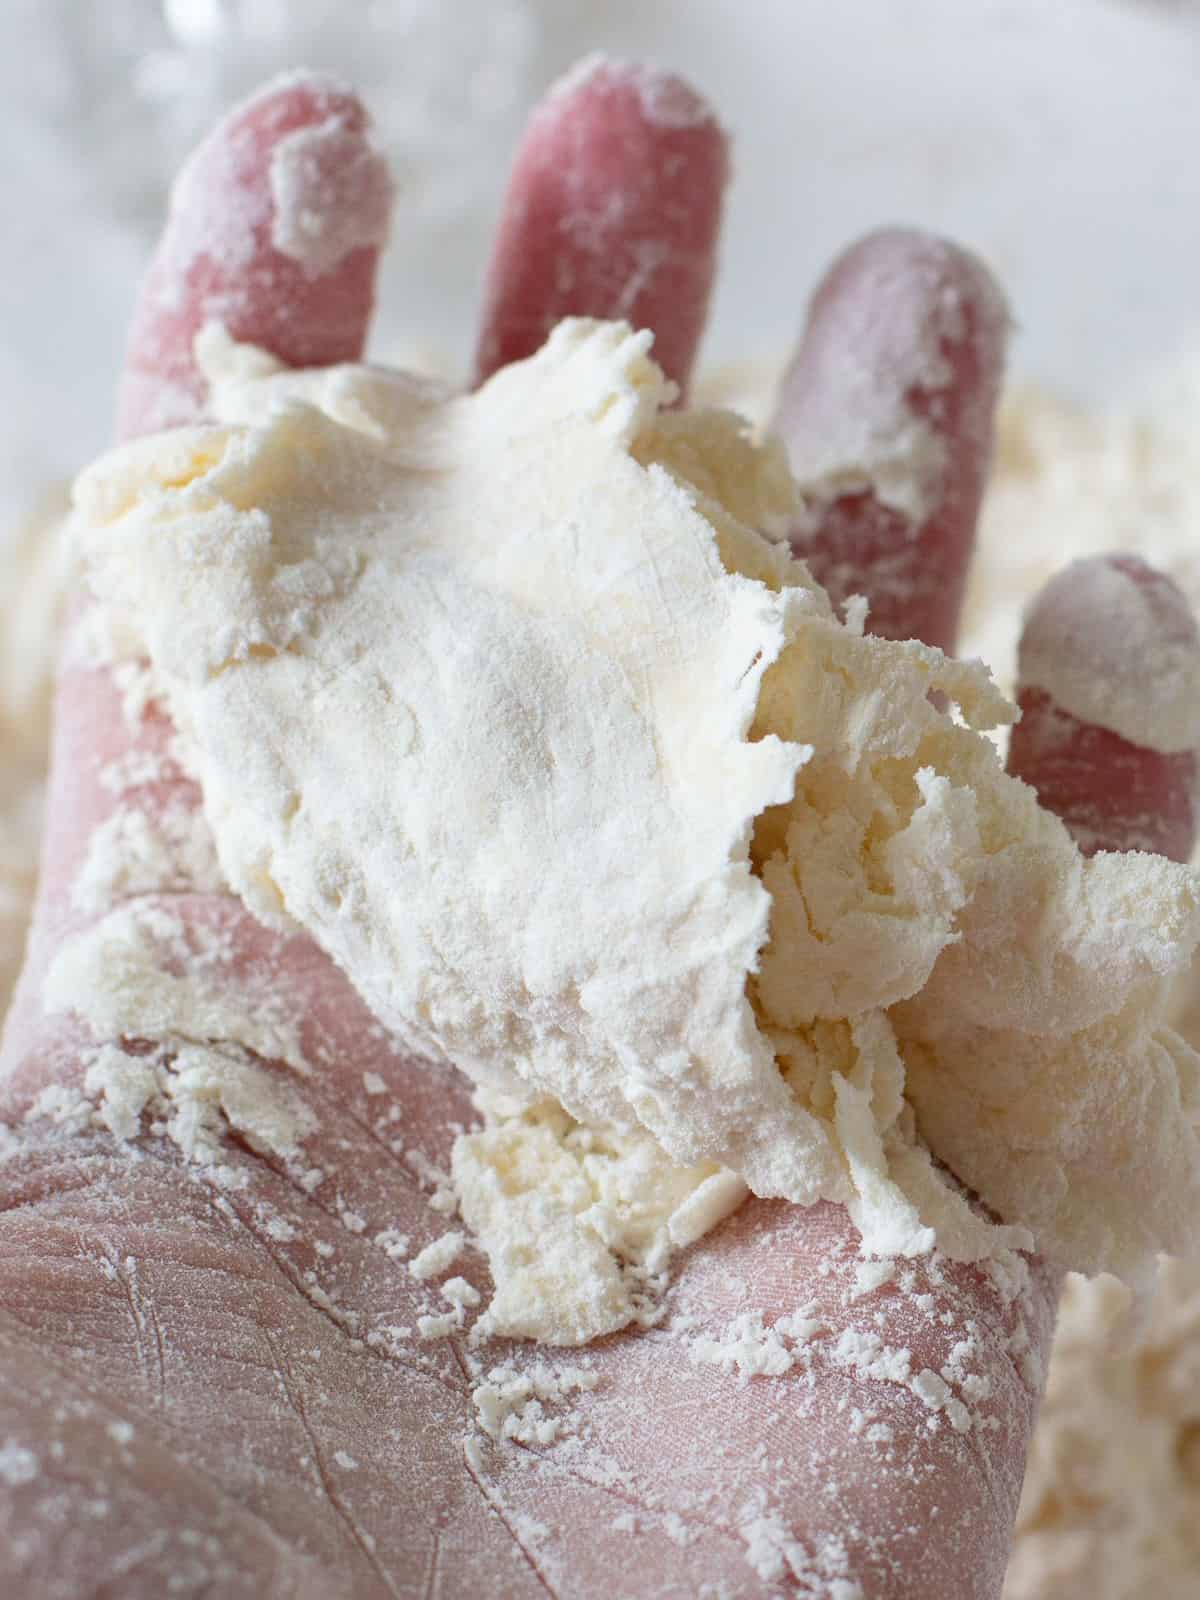 Large clump of dry pie crust dough in the palm of a hand.